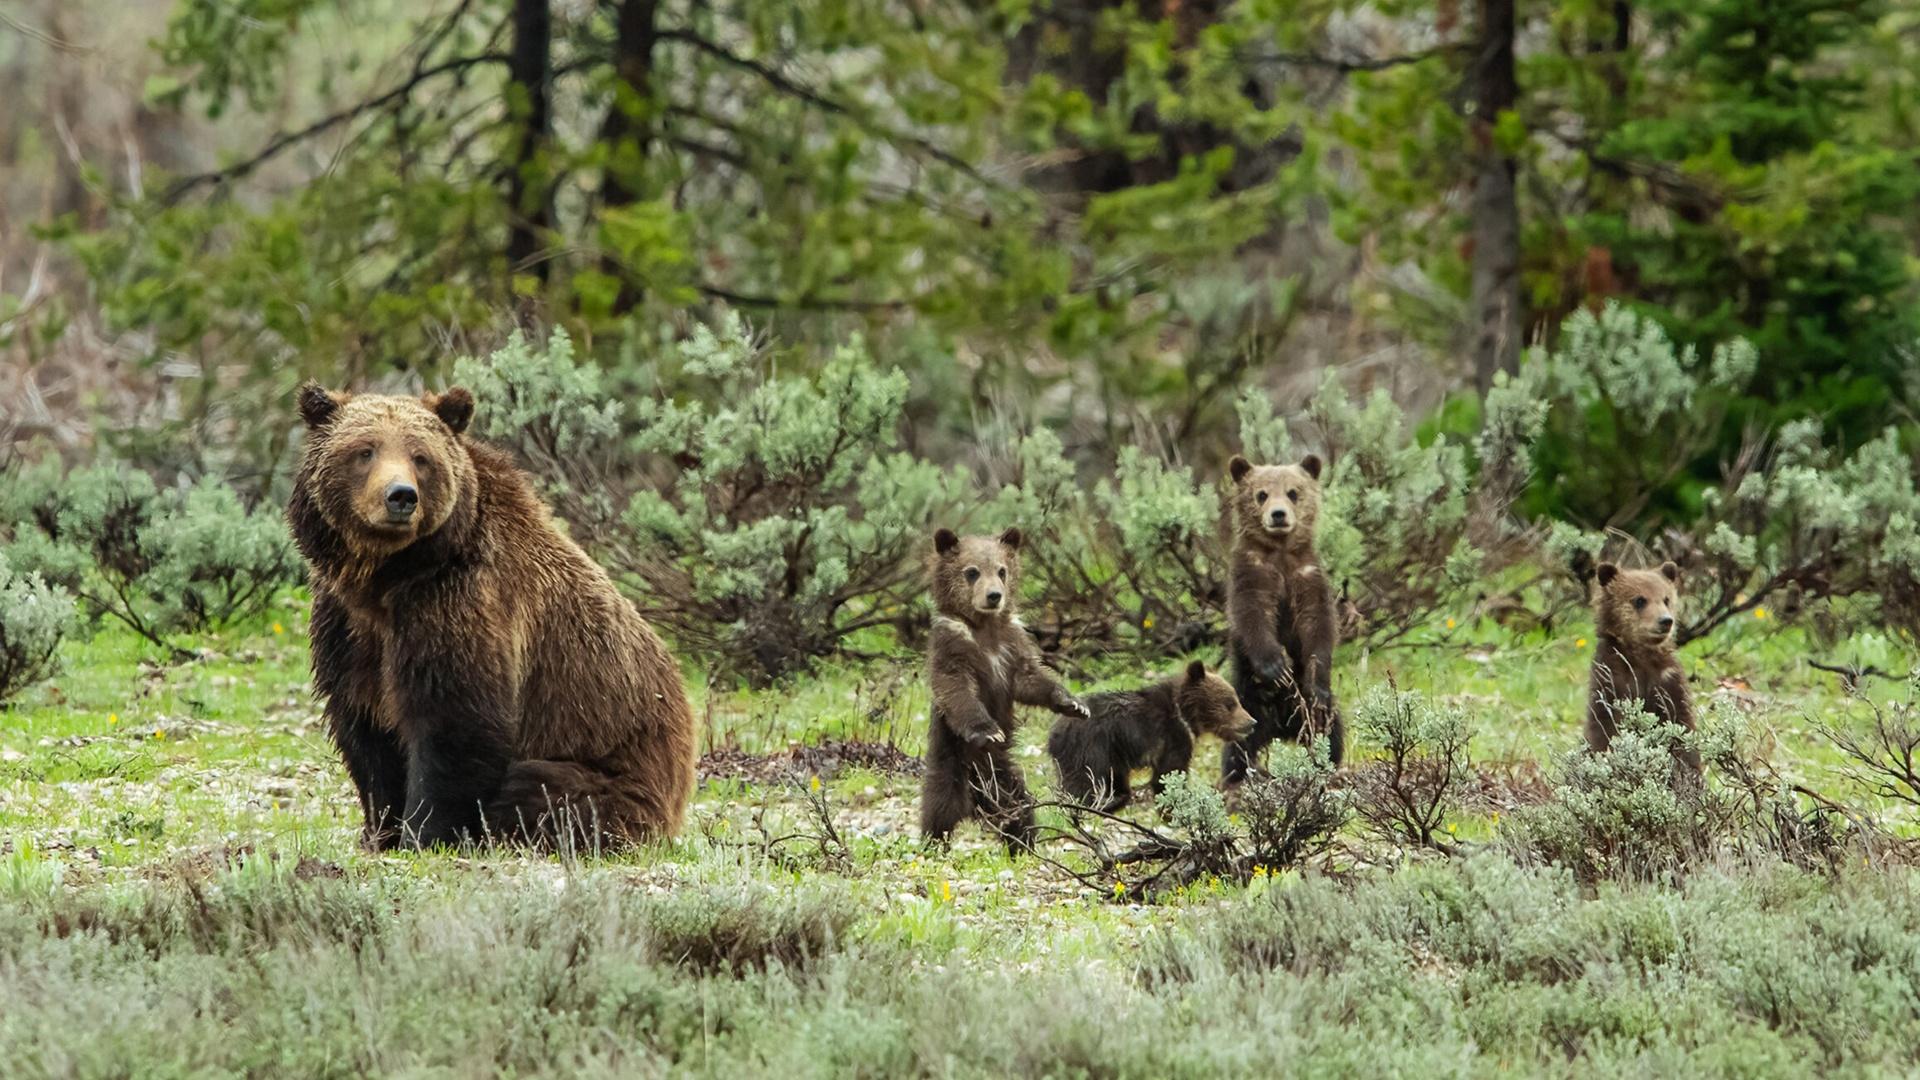 The new NATURE special, Grizzly 399: Queen of the Tetons features the most famous bear in Grand Teton National Park.